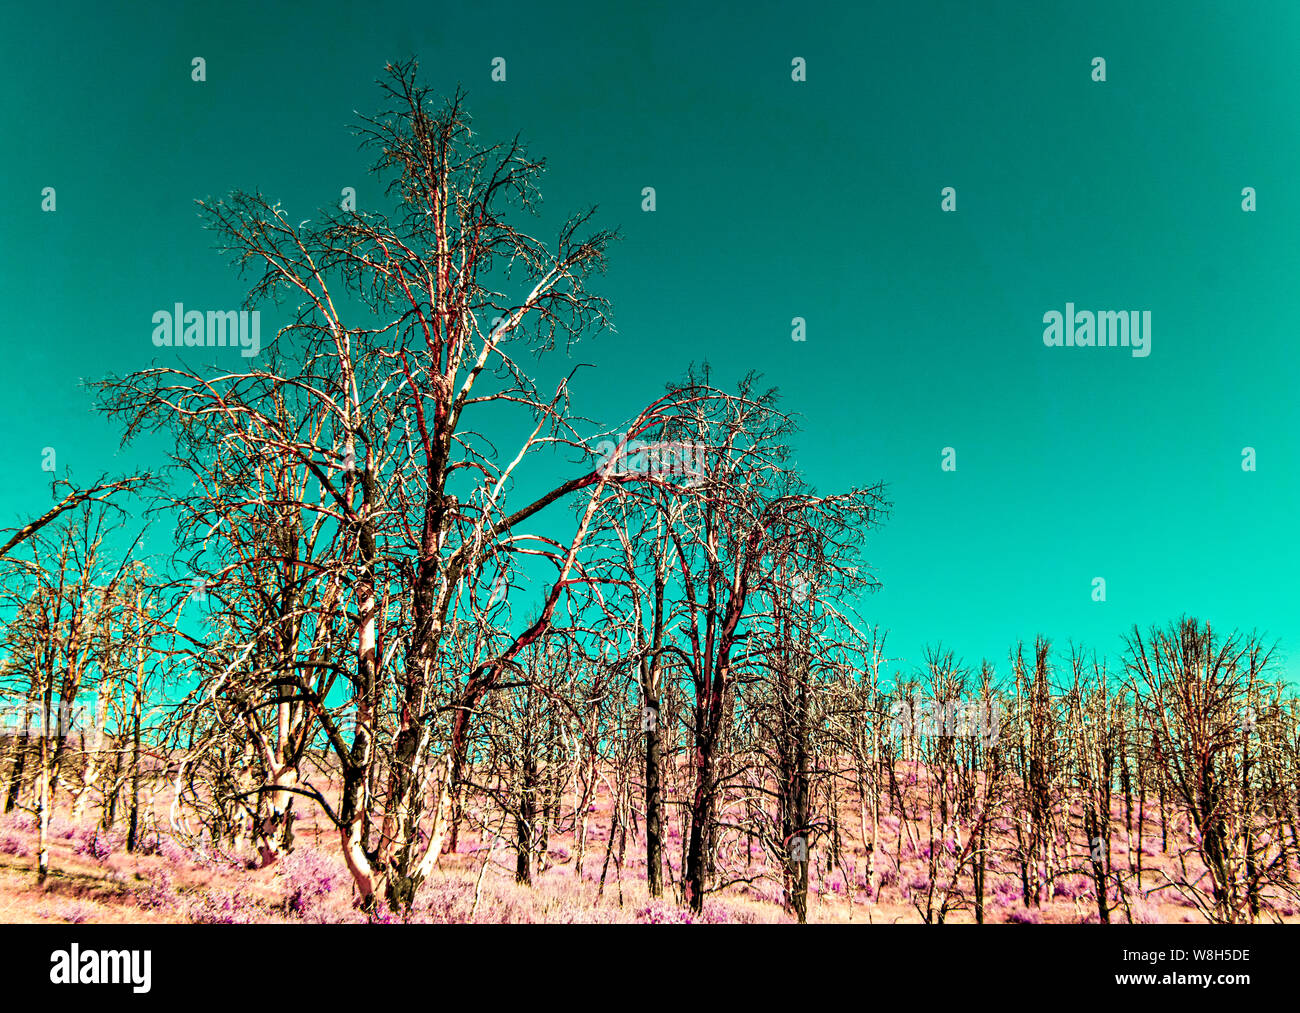 Forest of dead burnt trees after forest fire against turquoise sky, sparse red vegetation. Infrared image. Stock Photo